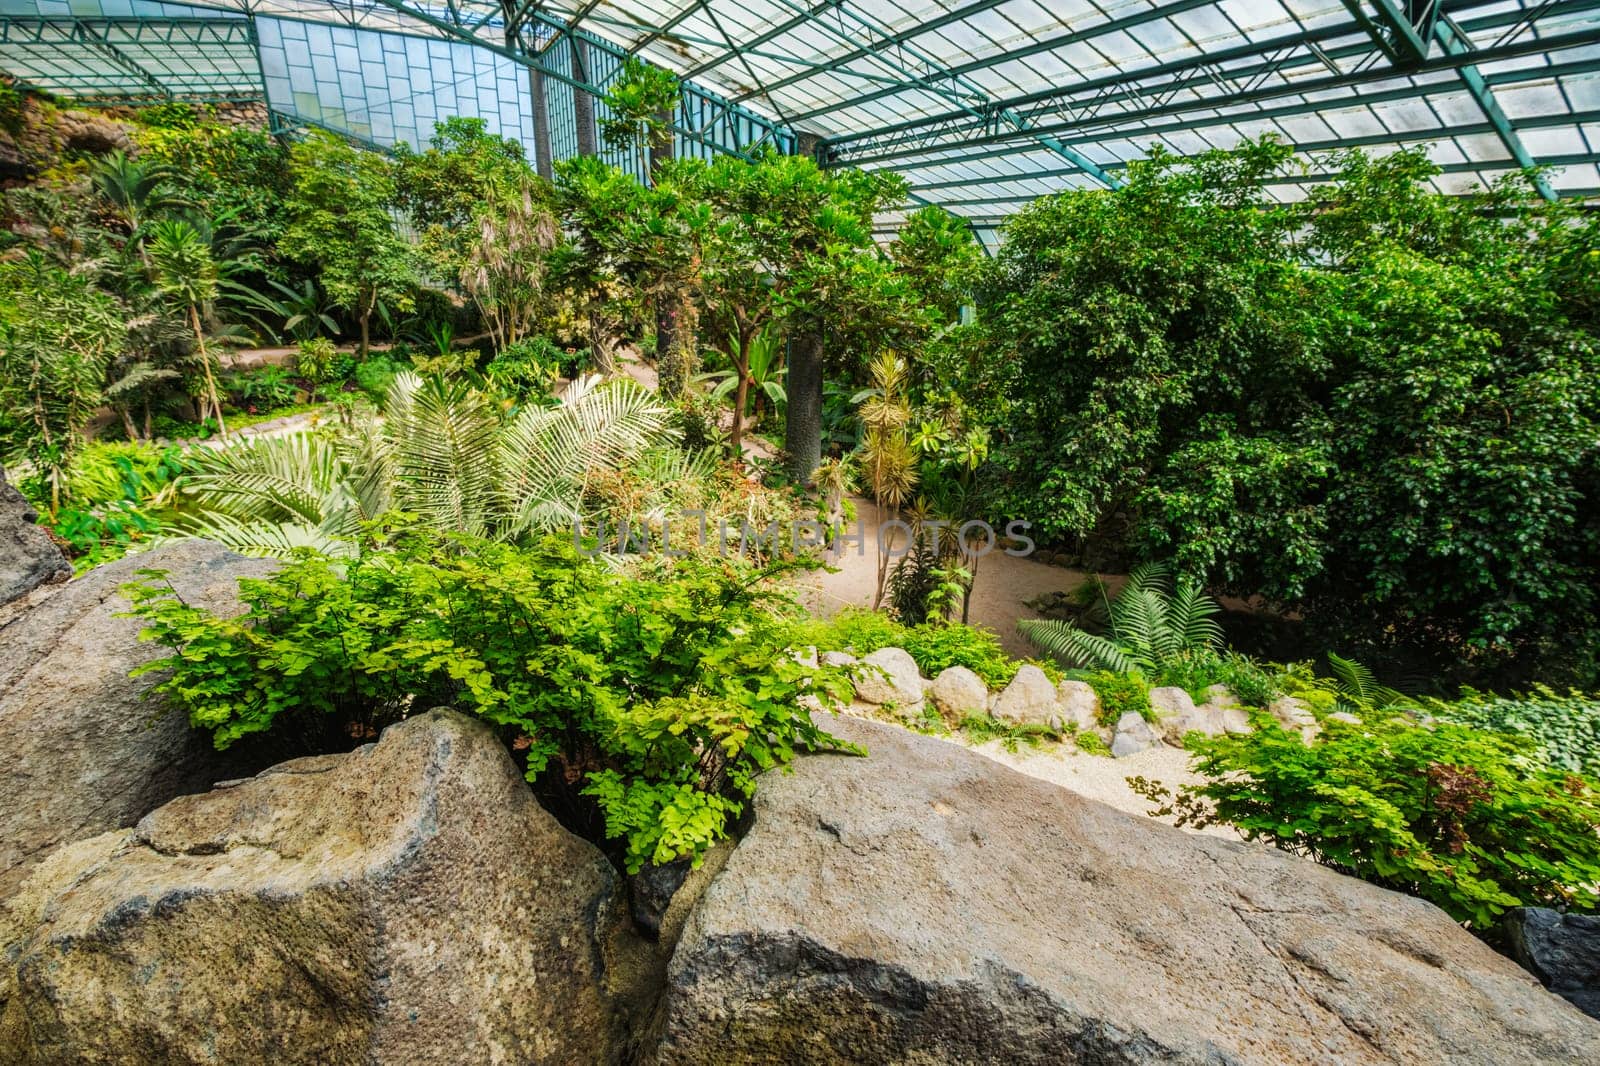 Interior view of the cold house Estufa Fria is a greenhouse with gardens, ponds, exotic plants and trees in Lisbon, Portugal